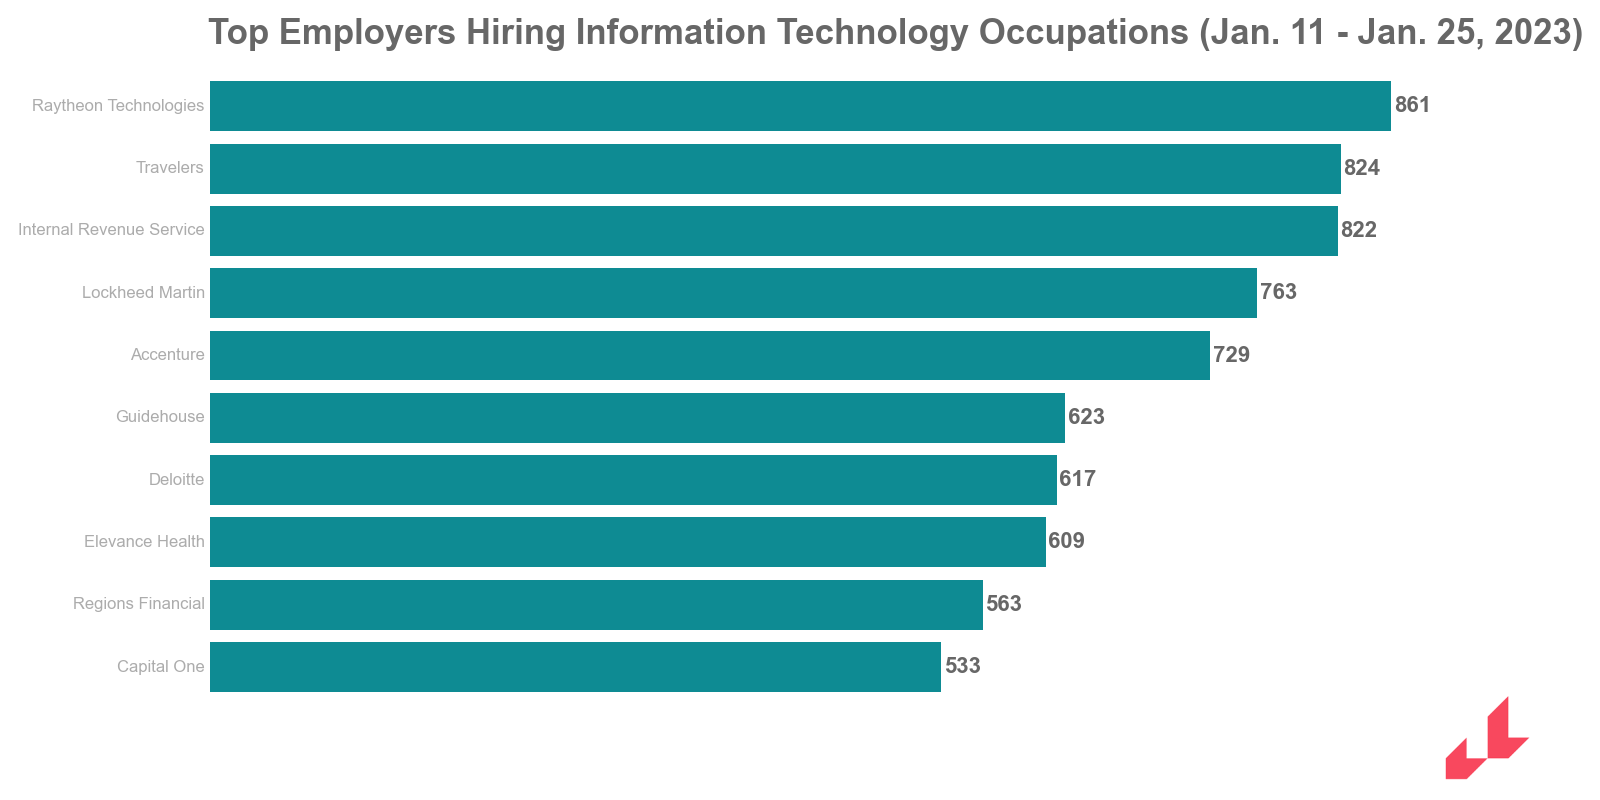 Top employers hiring information technology occupations (january 11 - january 25, 2023)